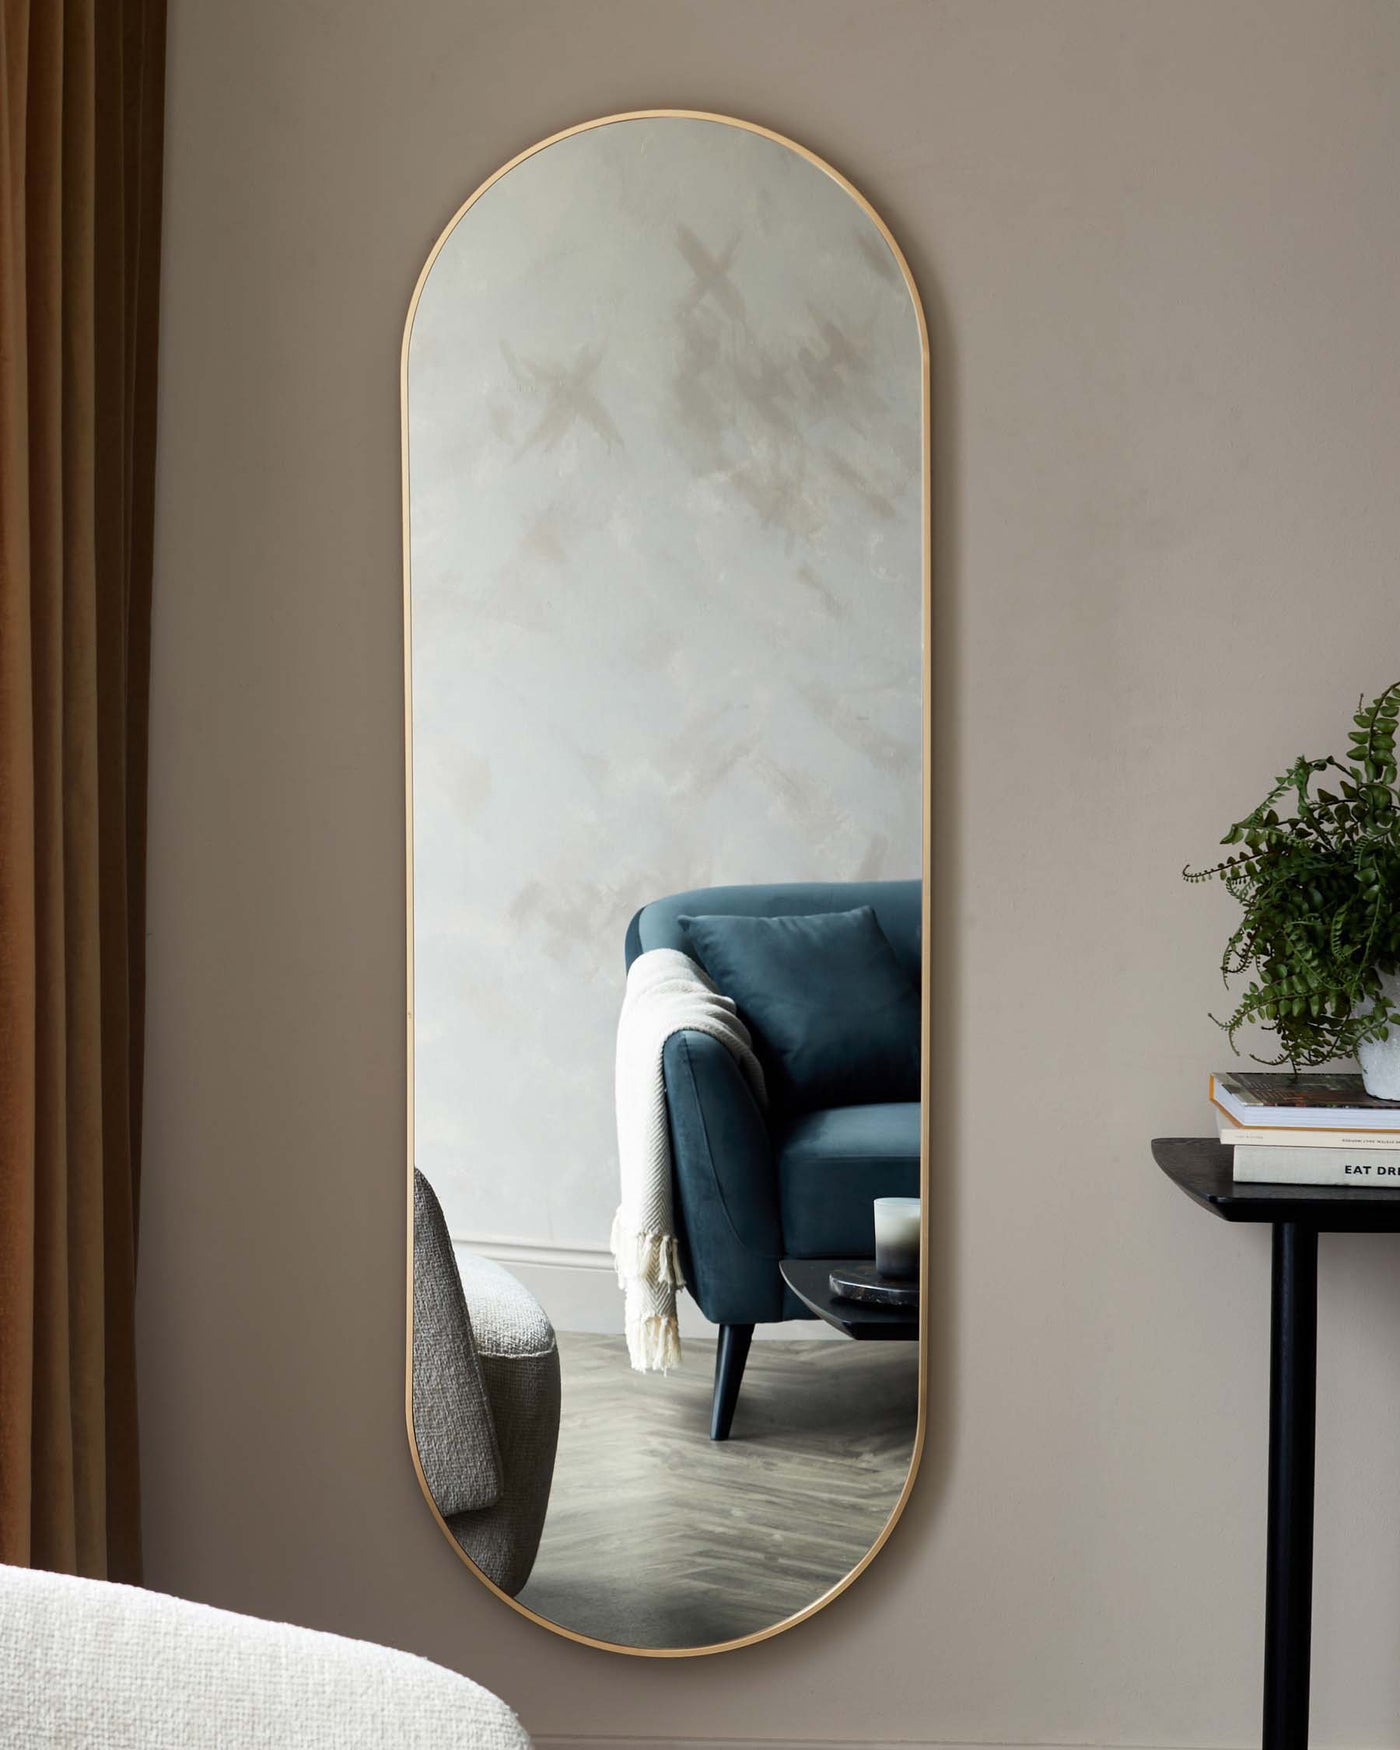 An elegant, tall oval mirror with a slim gold frame is centrally positioned against a soft grey wall. To its right, a modern, circular black side table supports an assortment of books and a lush green potted plant. The reflection captures a luxurious deep blue velvet armchair adorned with a cosy white throw blanket.